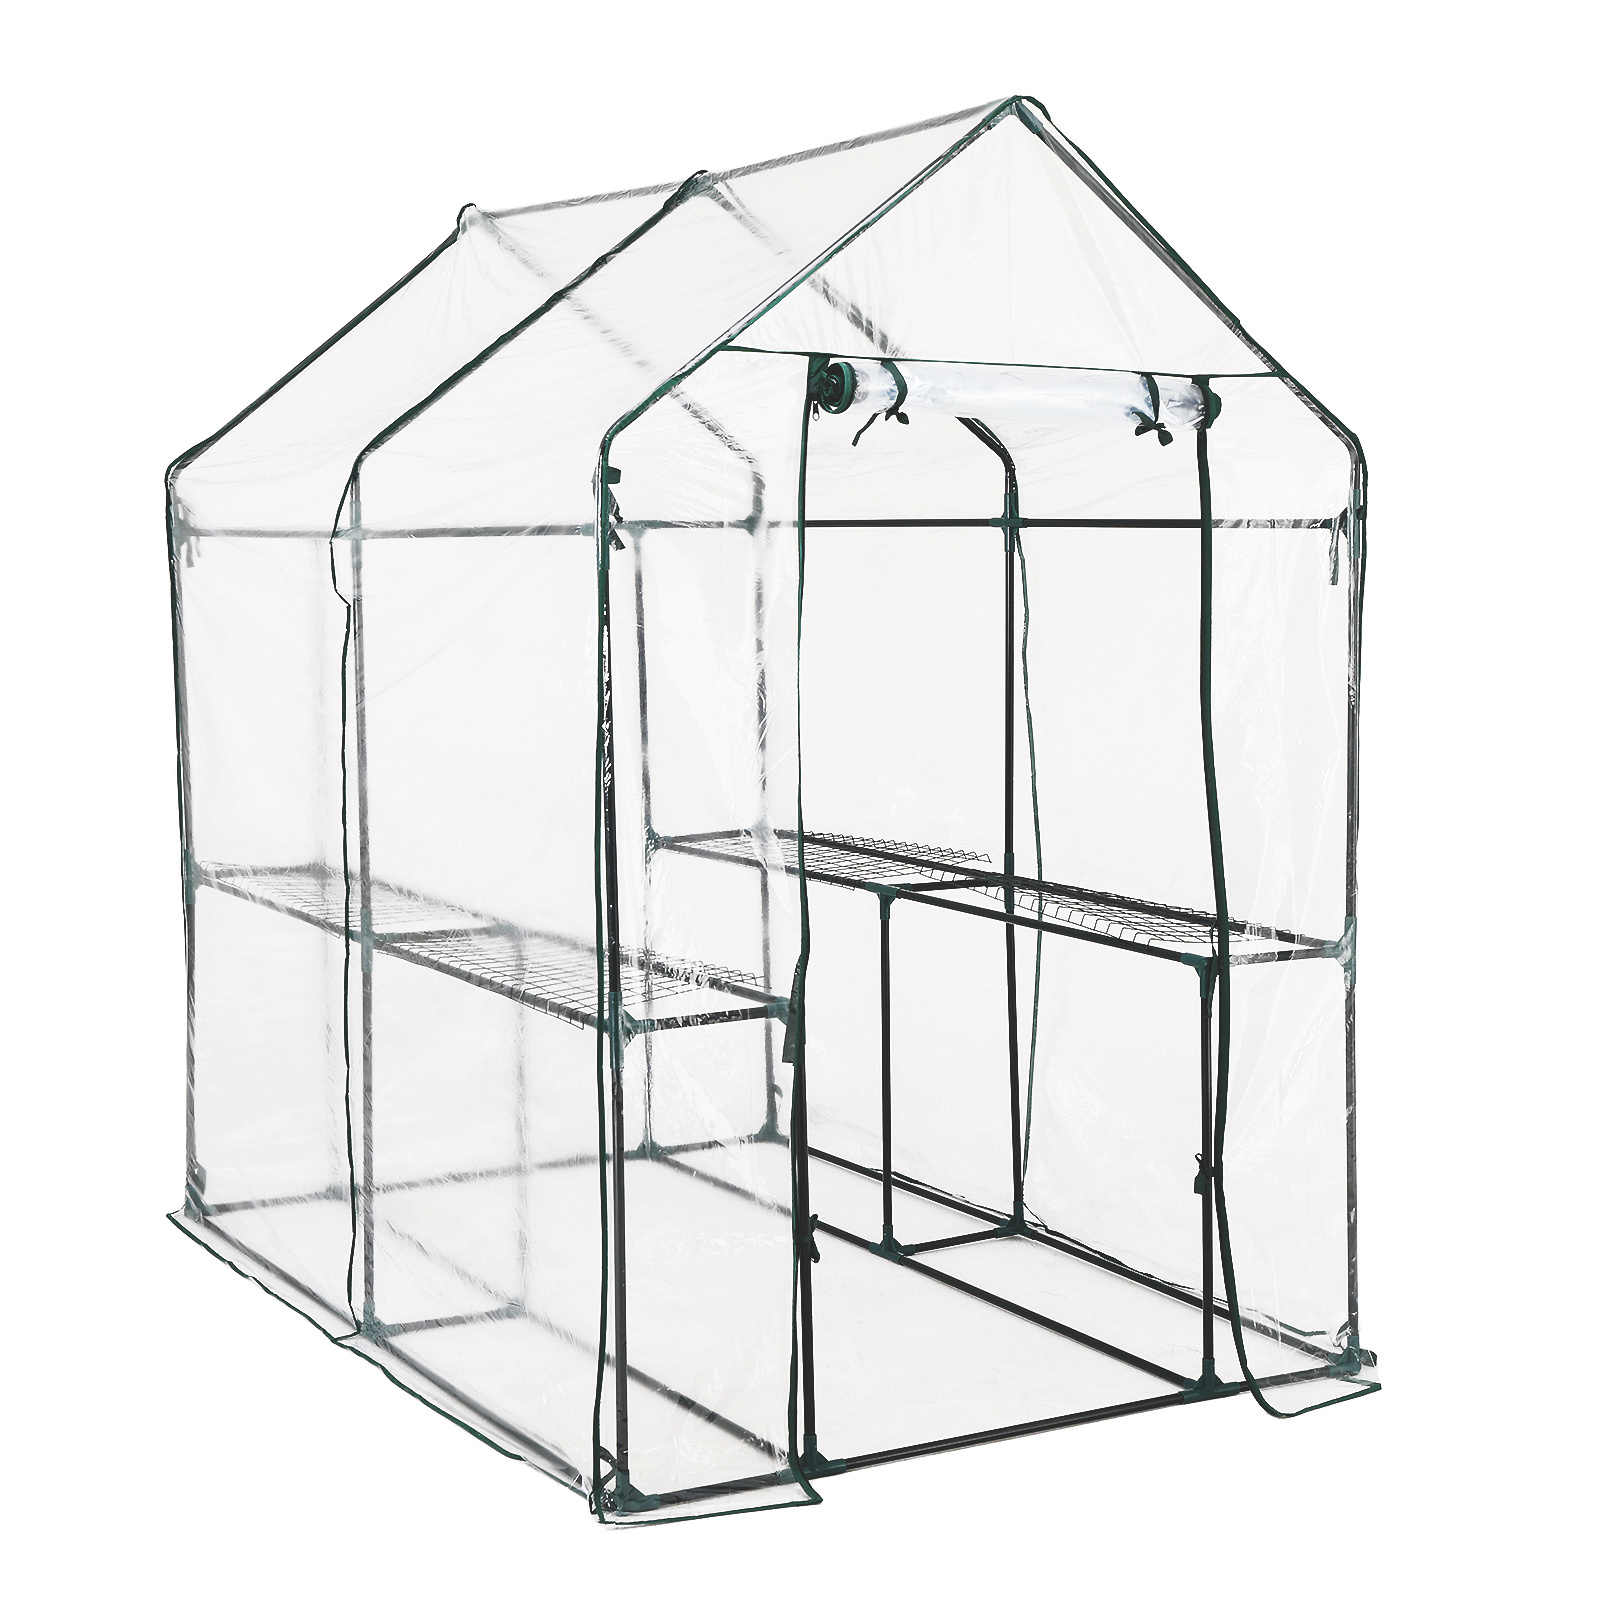 190cm Greenhouse PVC Apex Roof - CLEAR